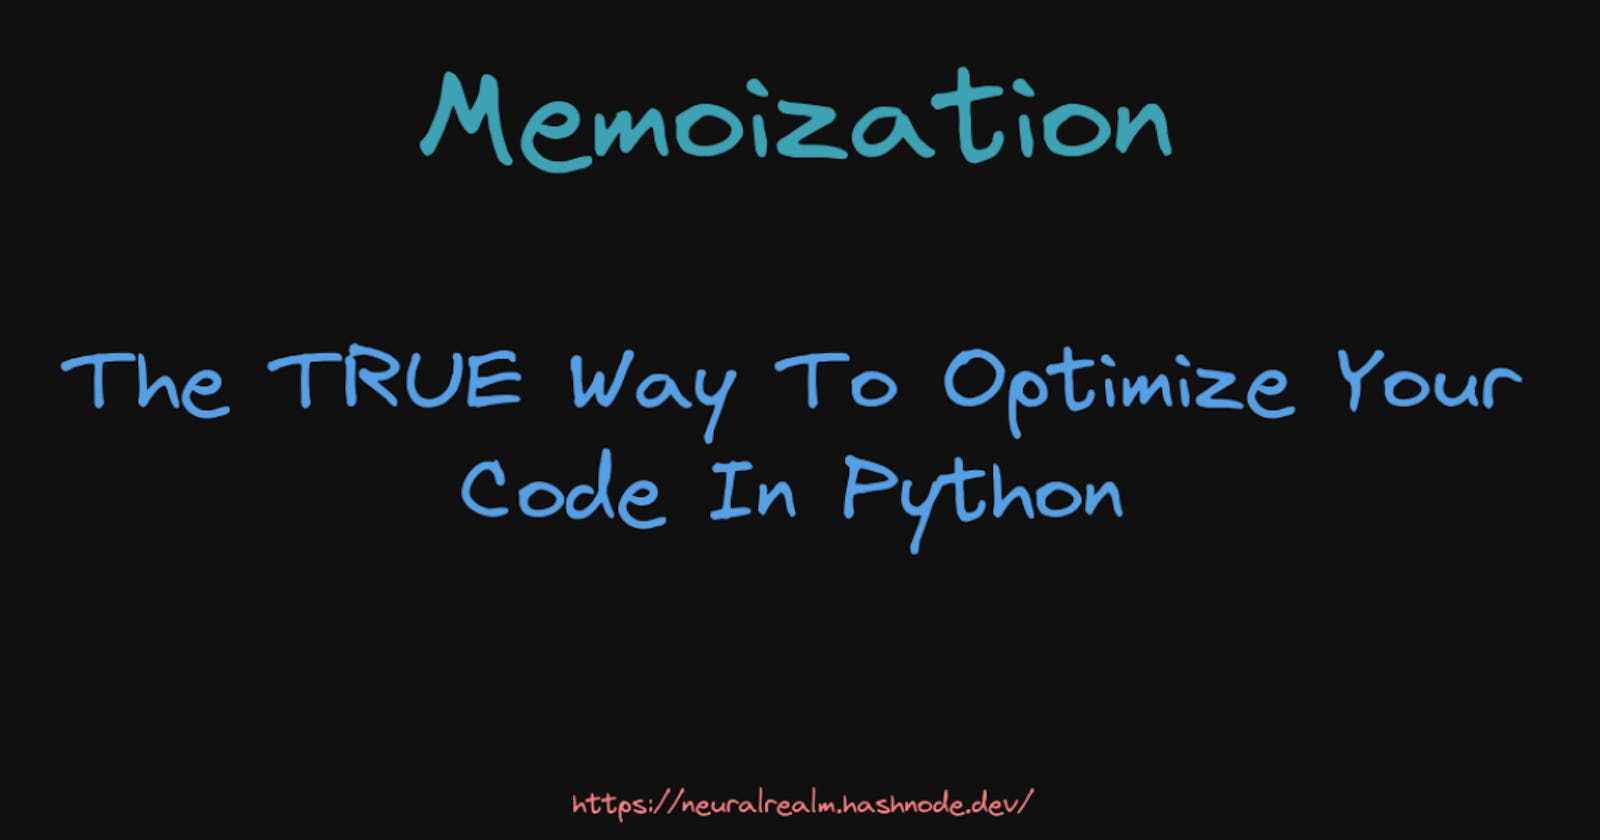 Memoization: The TRUE Way To Optimize Your Code In Python